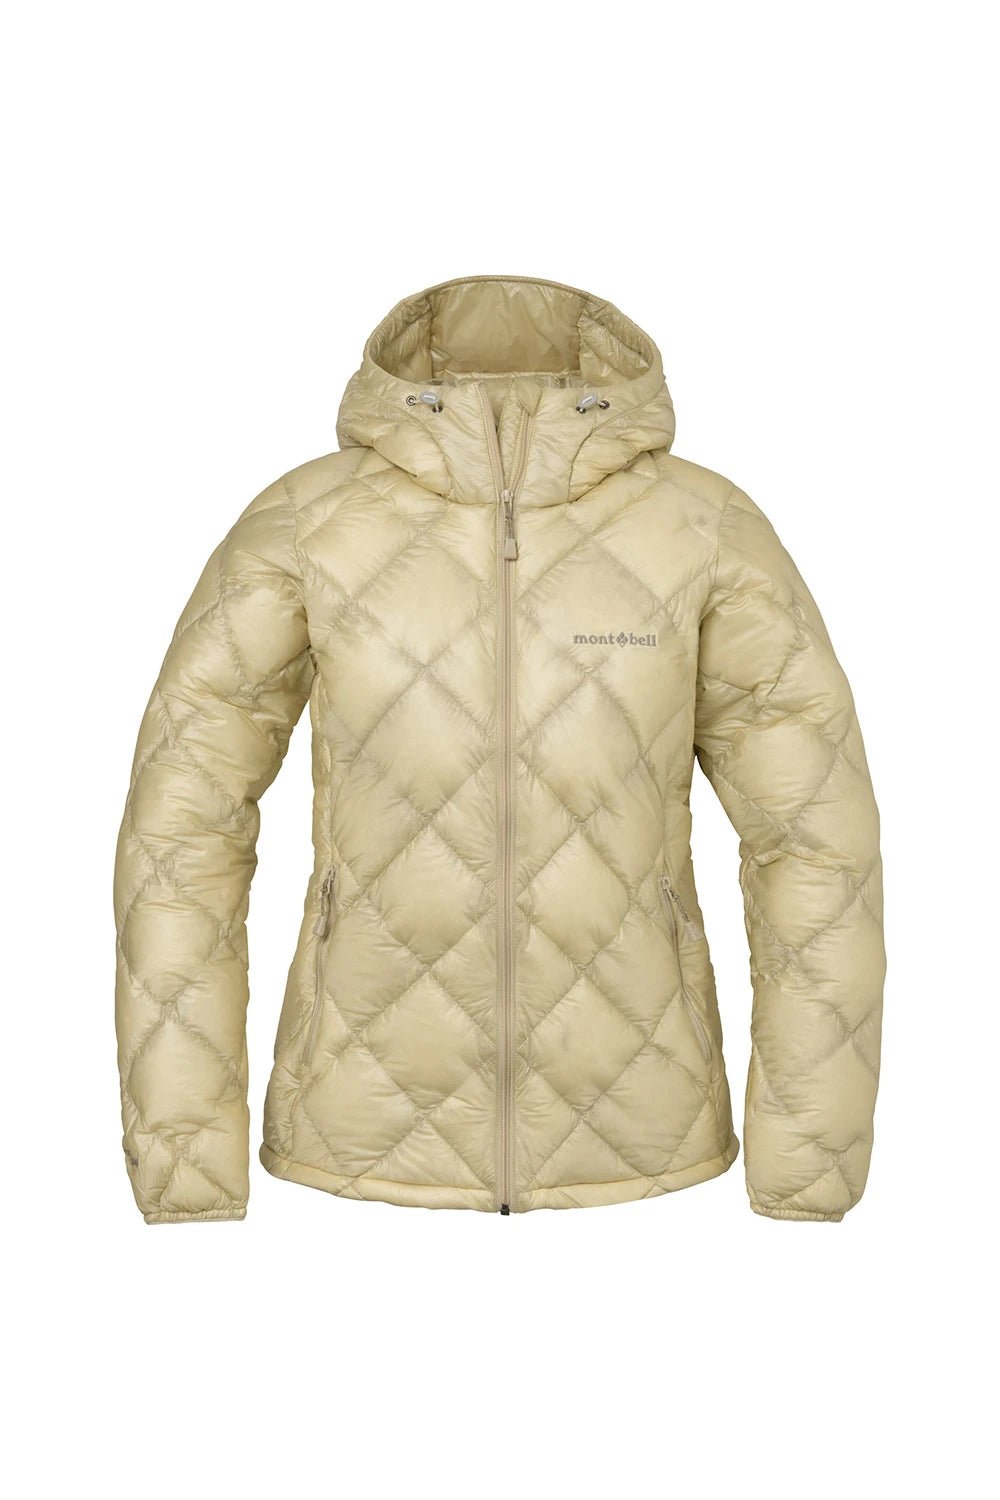 Montbell Womens Superior Down Parka - Ivory | Coffee Outdoors